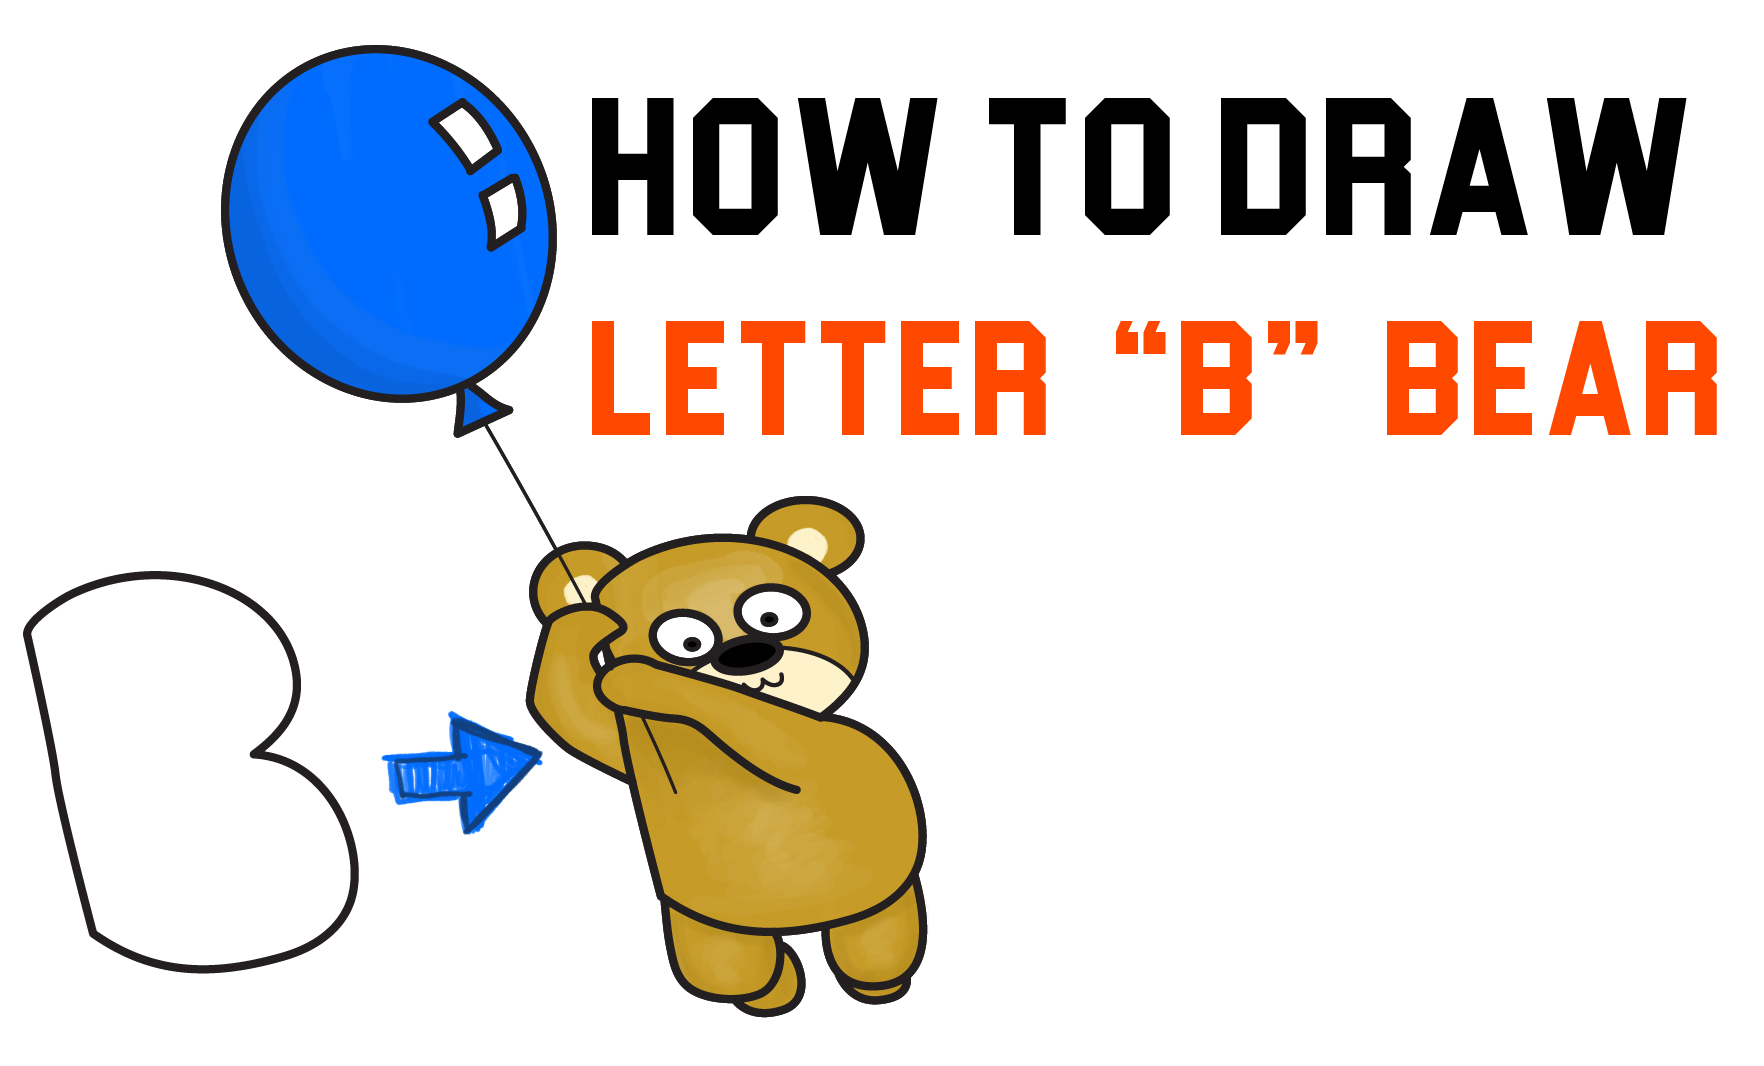 How to Draw a Cartoon Bear Holding a Balloon Floating Up Easy from Letter B Easy Step by Step Drawing Tutorial for Kids